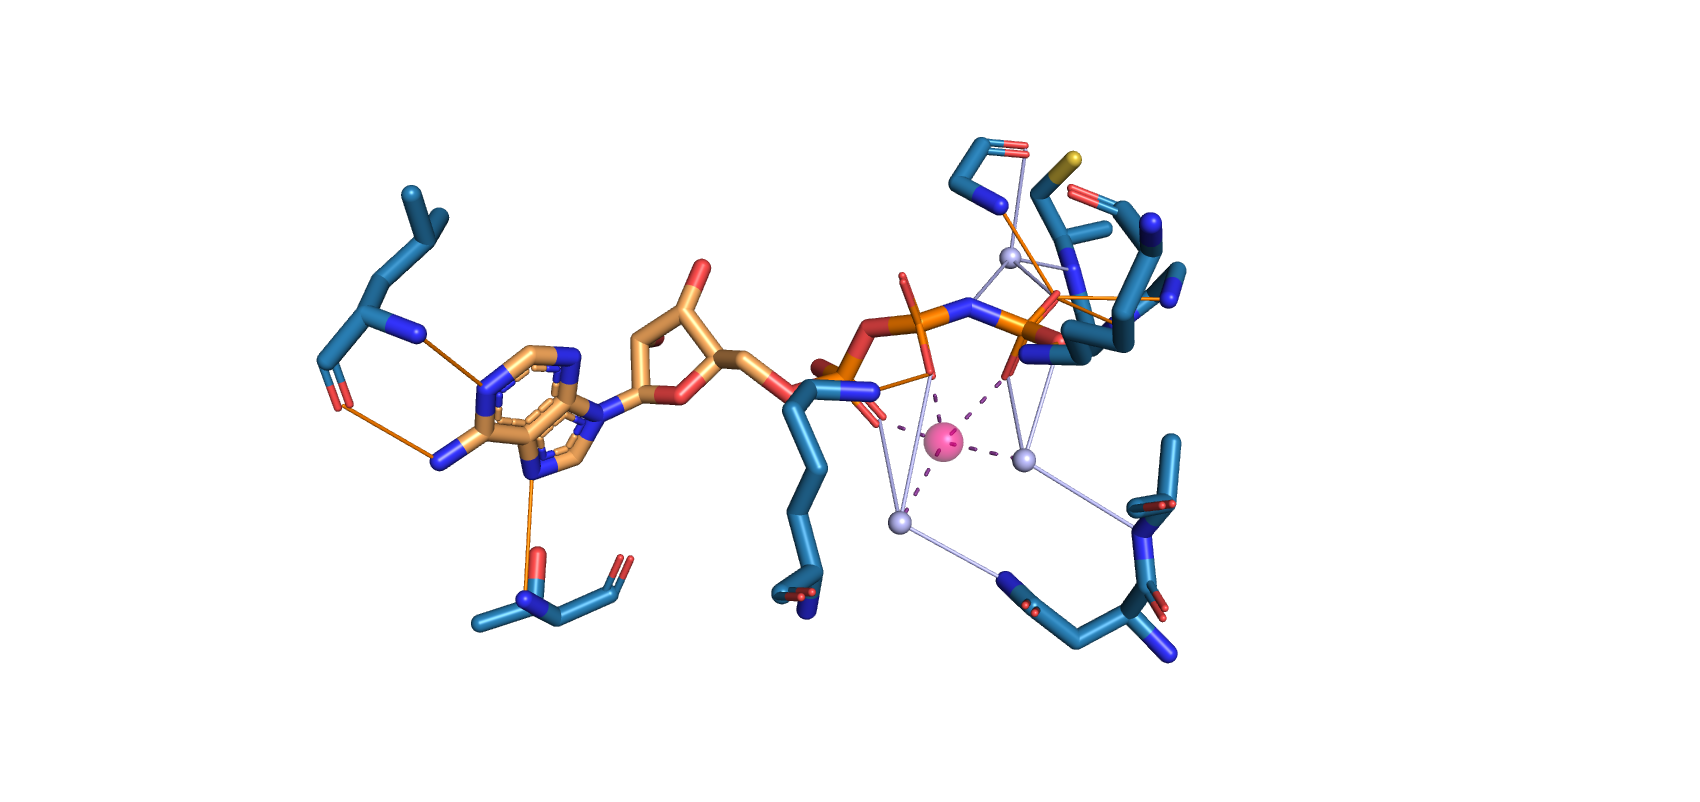 PLIP PyMol output of ANP ligand interactions with [1GS5](https://www.rcsb.org/structure/1gs5). A protein that I widely studied during my [PhD](https://www.tesisenred.net/bitstream/handle/10803/288044/MSM_PhD_THESIS.pdf?sequence=6&isAllowed=y)